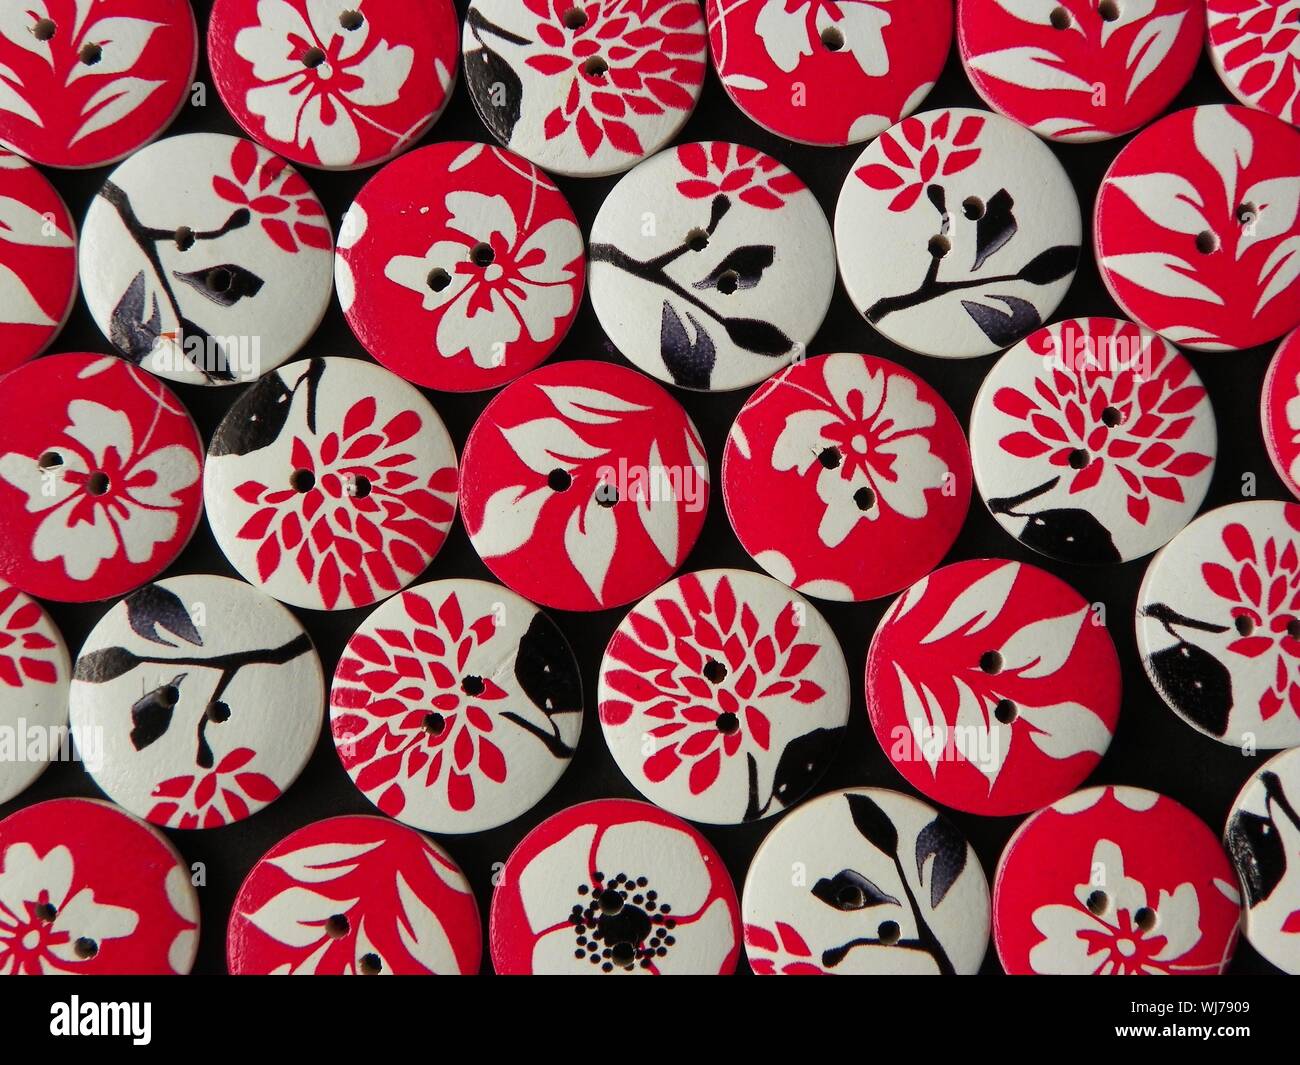 Full Frame View Of Circular Buttons With Floral Pattern Stock Photo